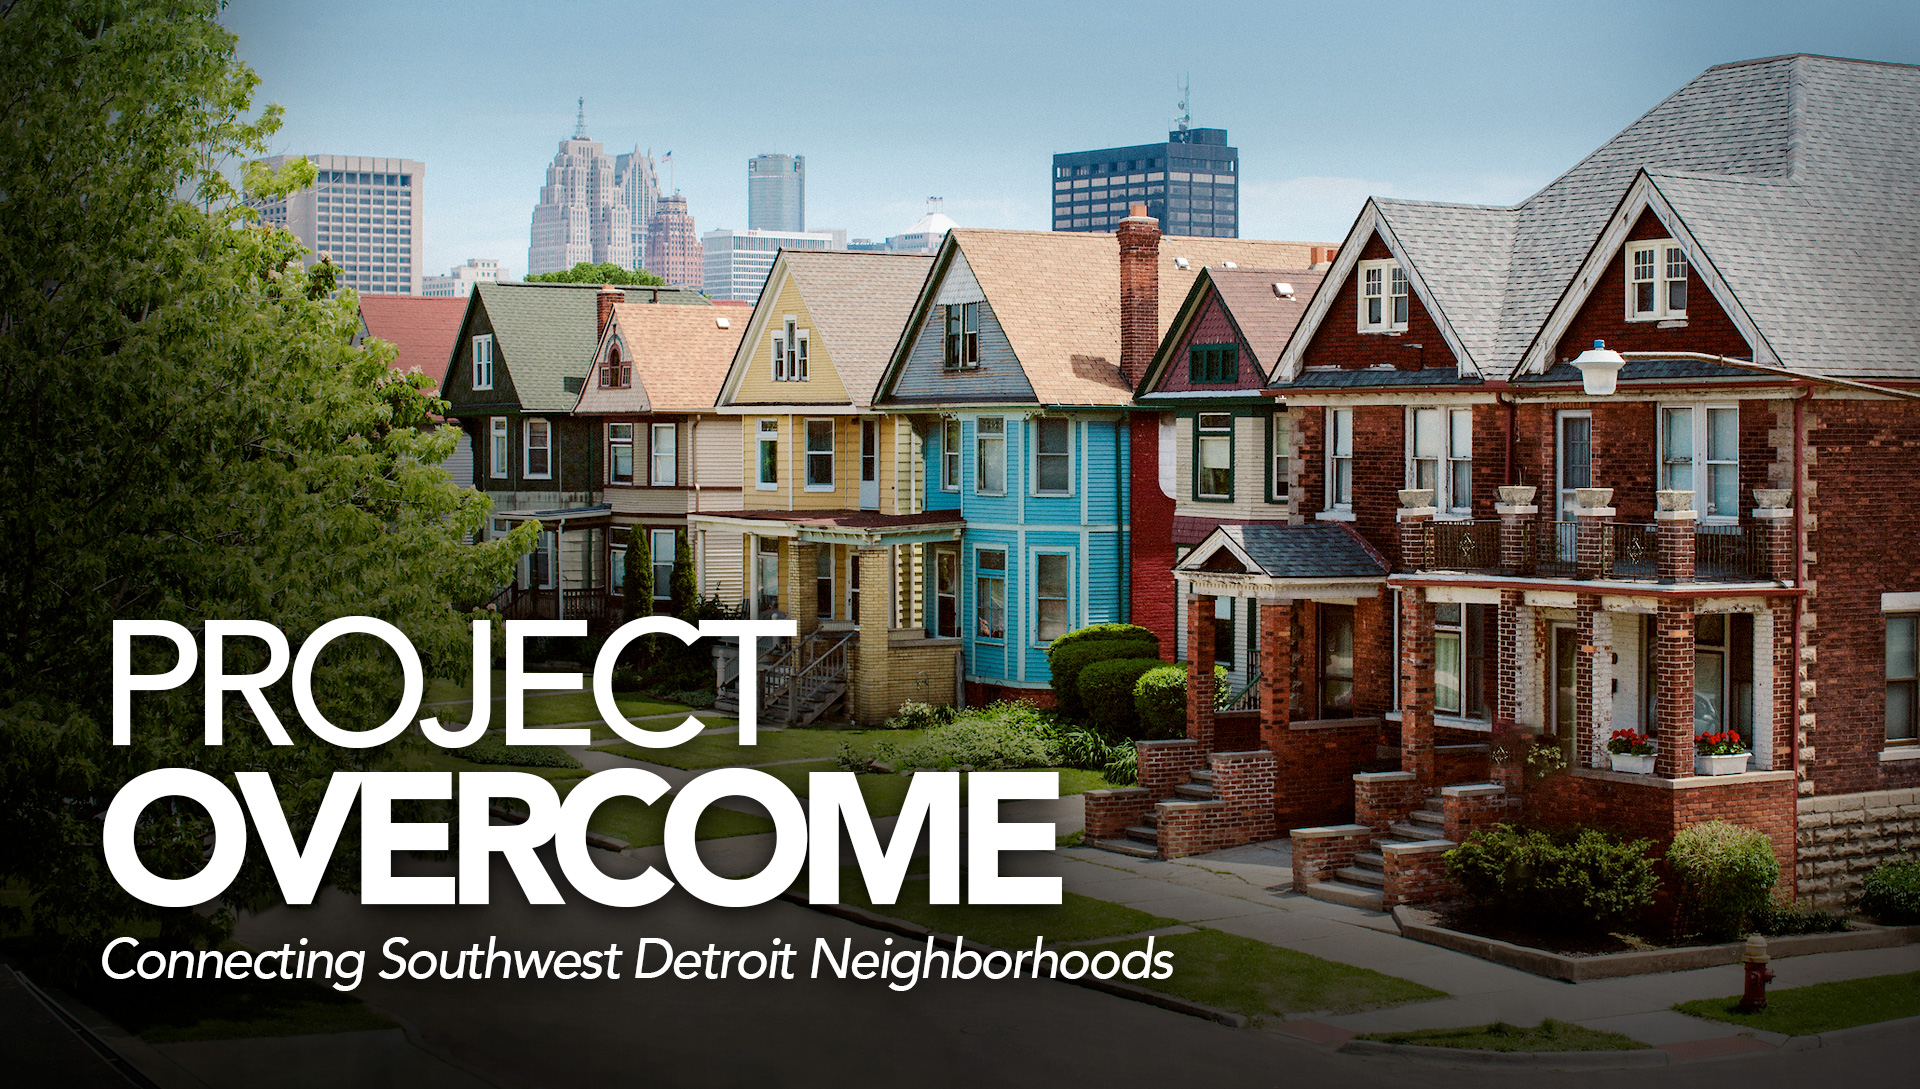 PROJECT OVERCOME: Helping Close Detroit’s Digital Divide